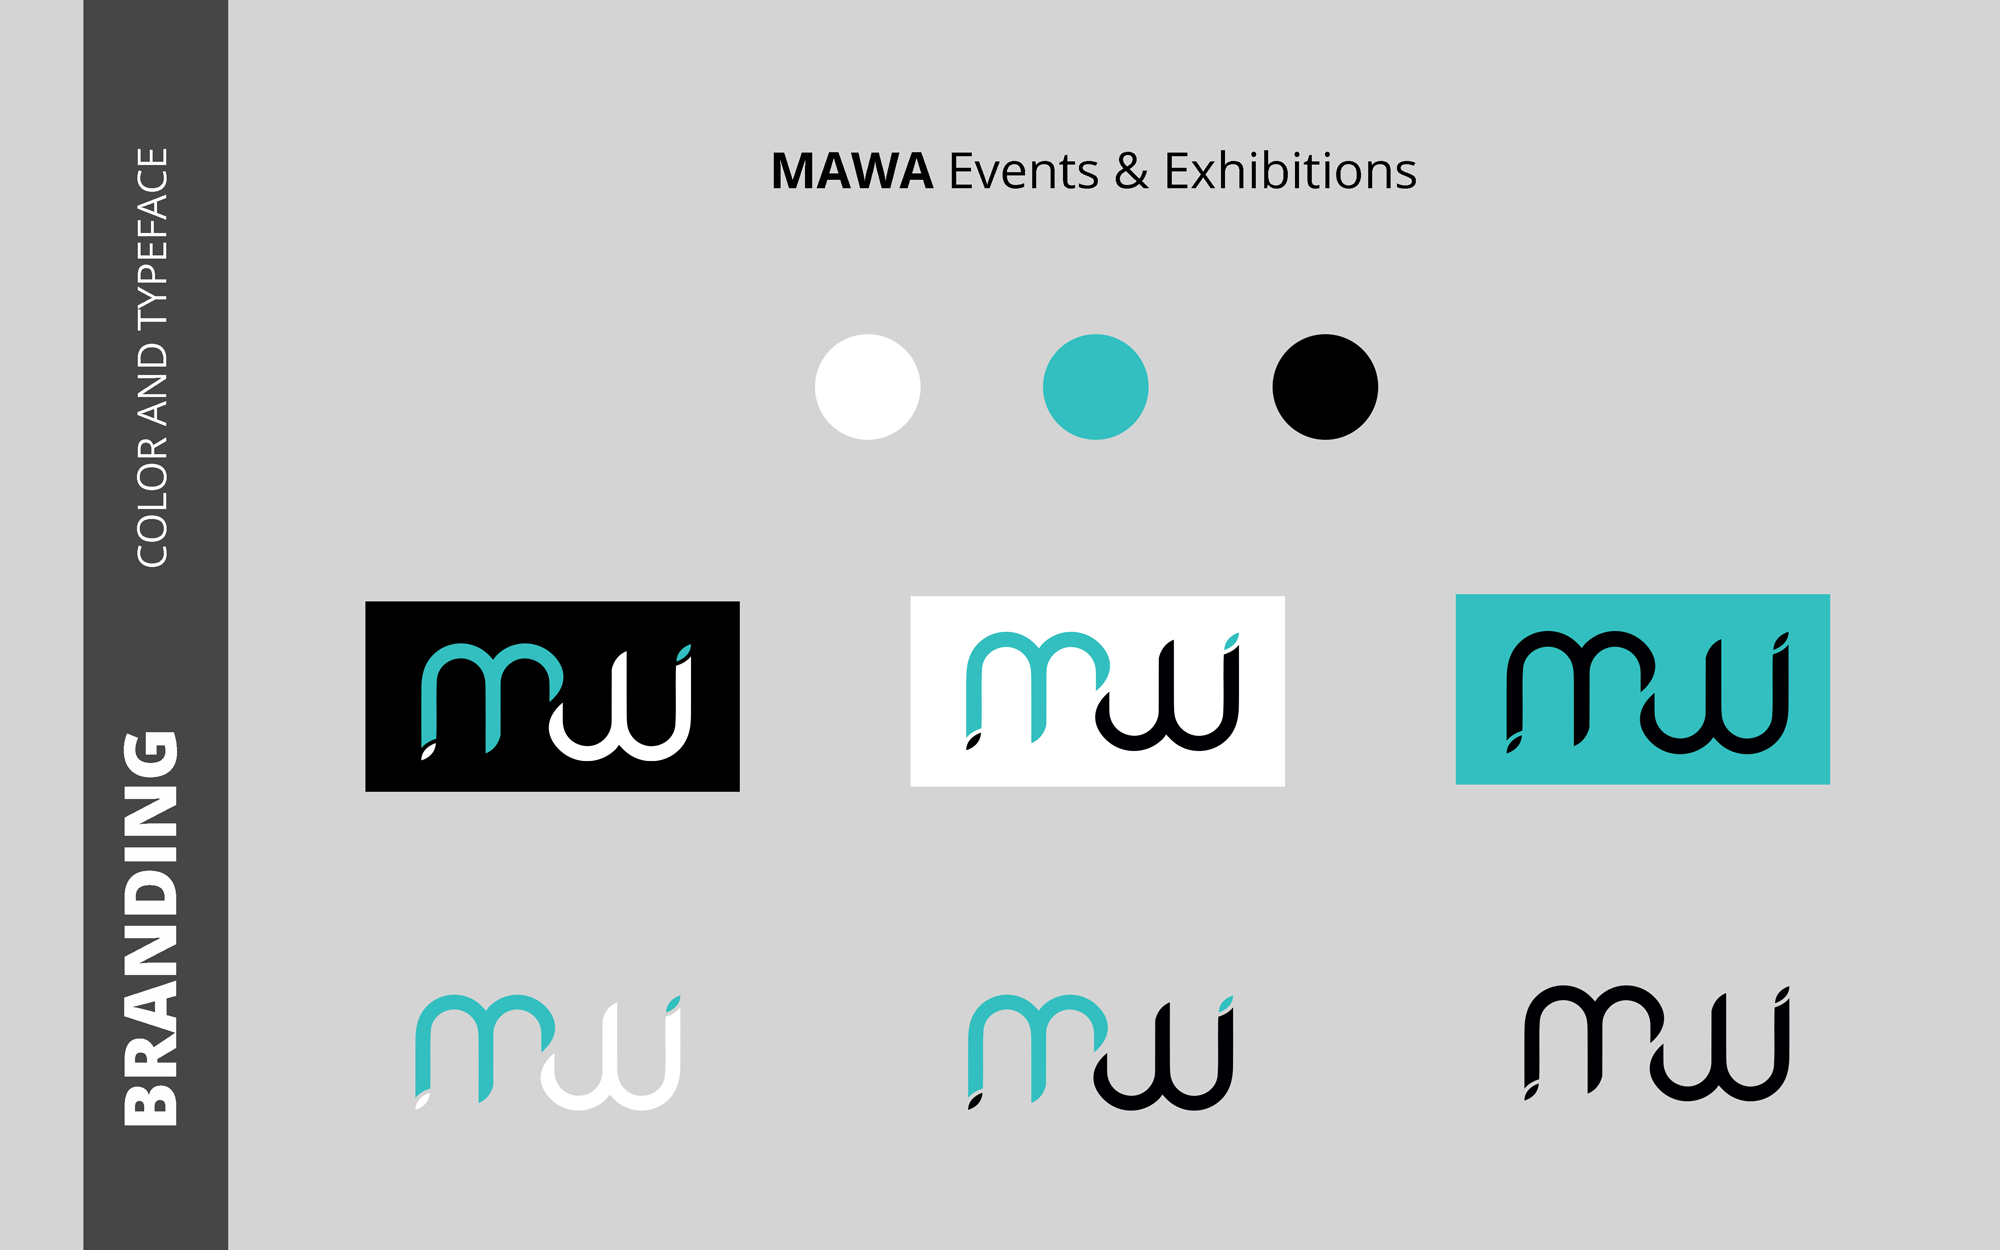 Mawa Events & Exhibitions